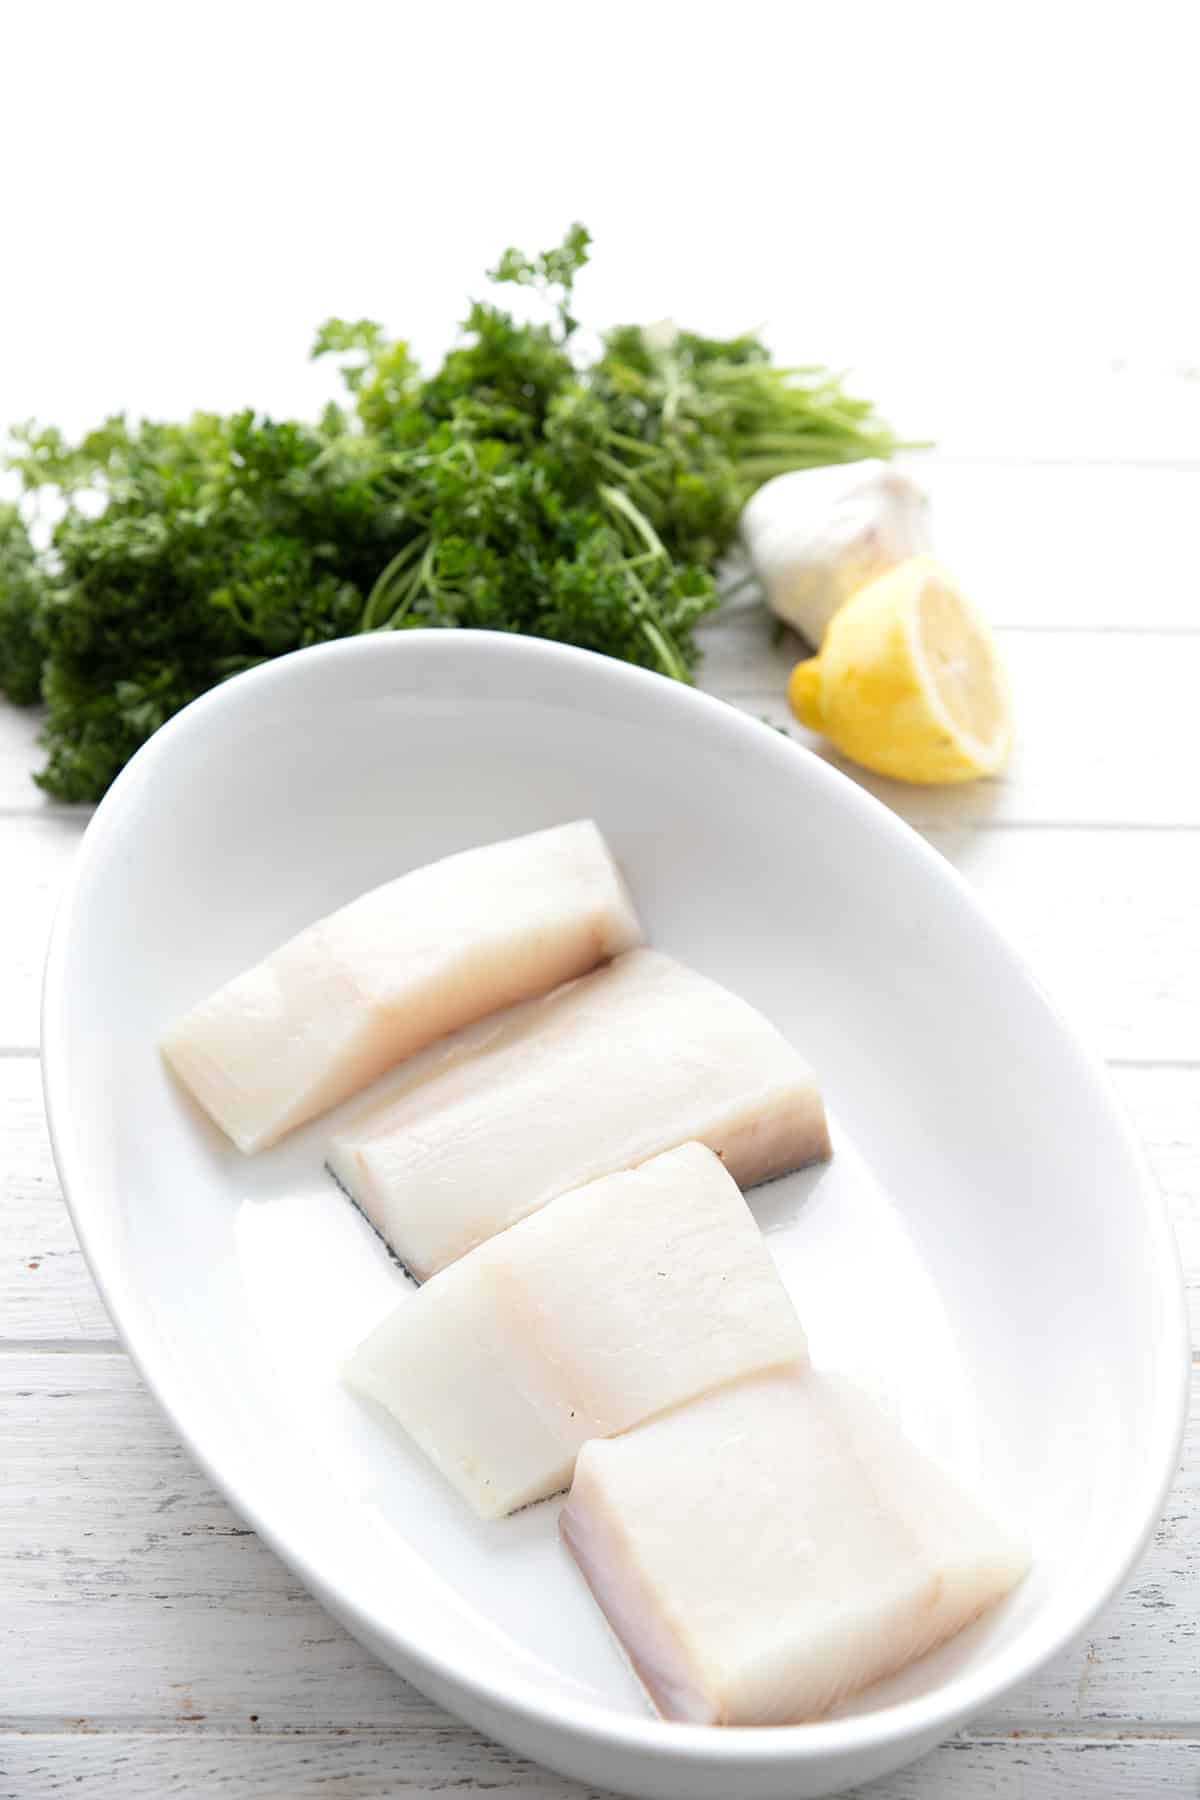 A photo of the ingredients for Lemon Garlic Baked Halibut.